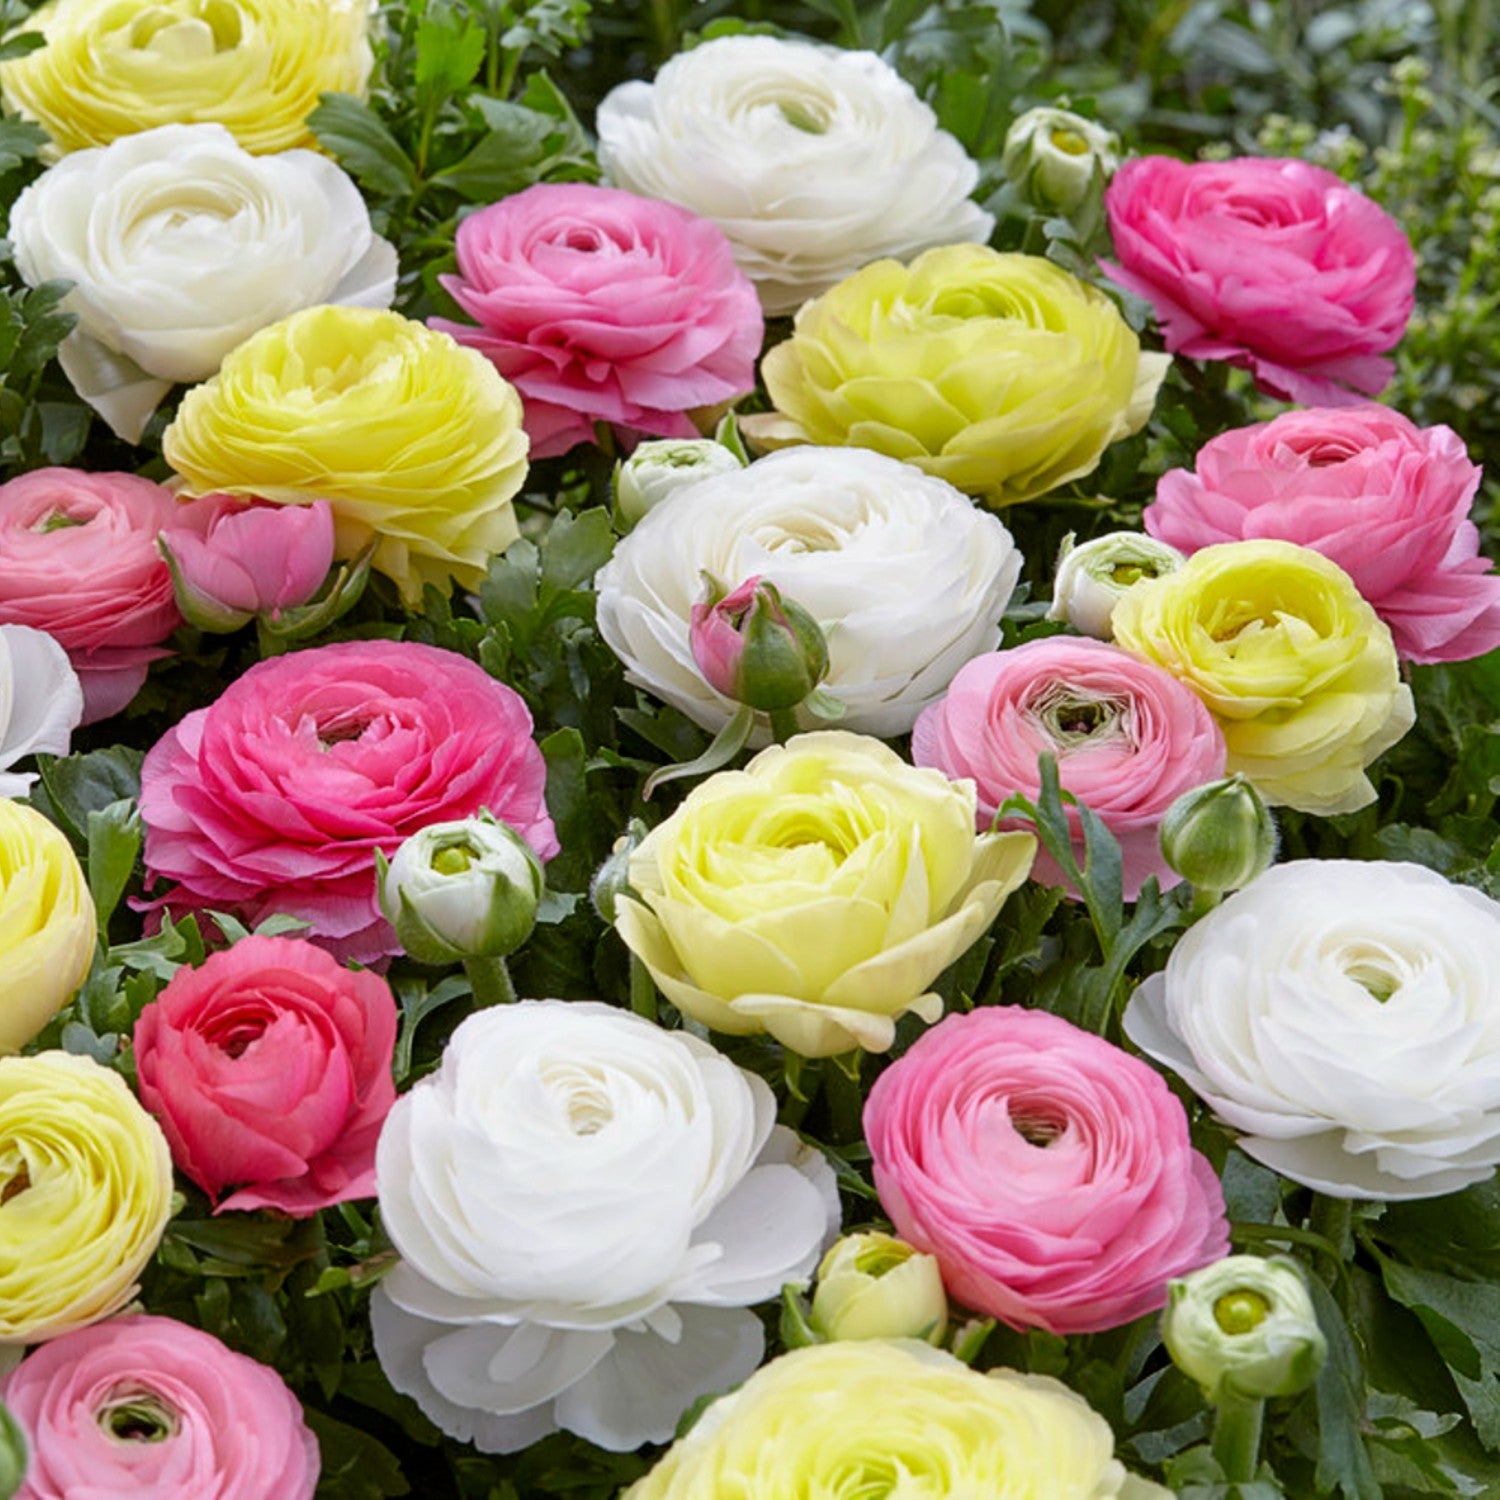 Tecolote Ranunculus Pastel Mix Bulbs For Sale Online Easy To Grow Bulbs